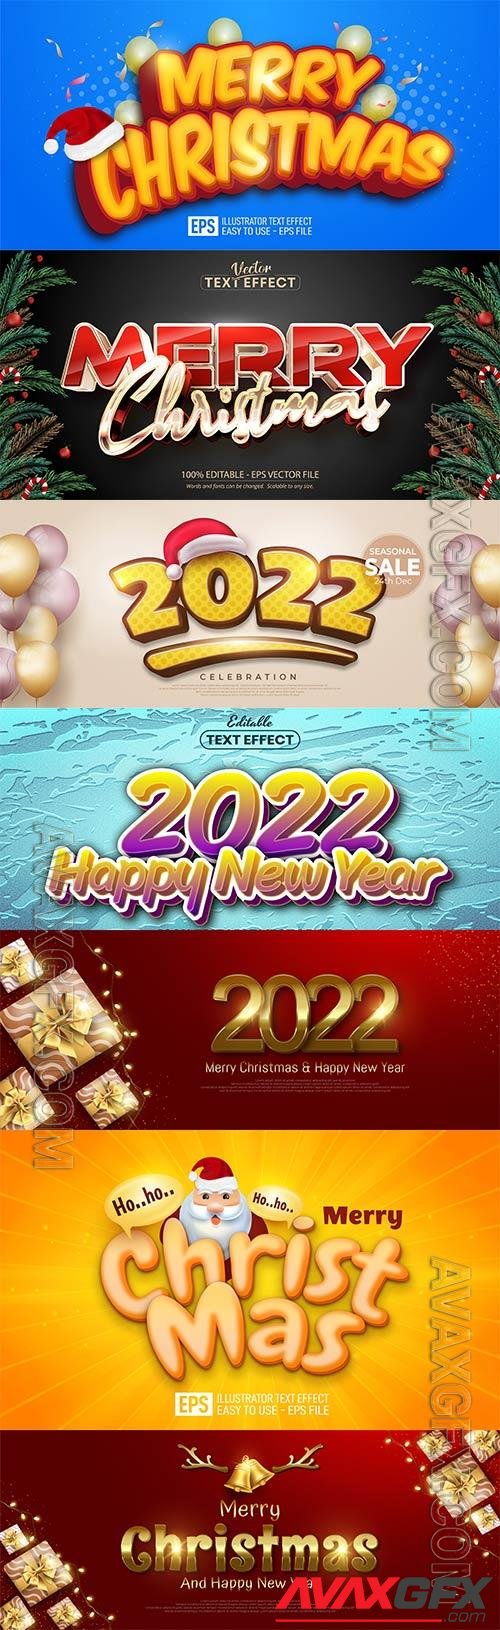 Merry christmas and happy new year 2022 editable vector text effects vol 8